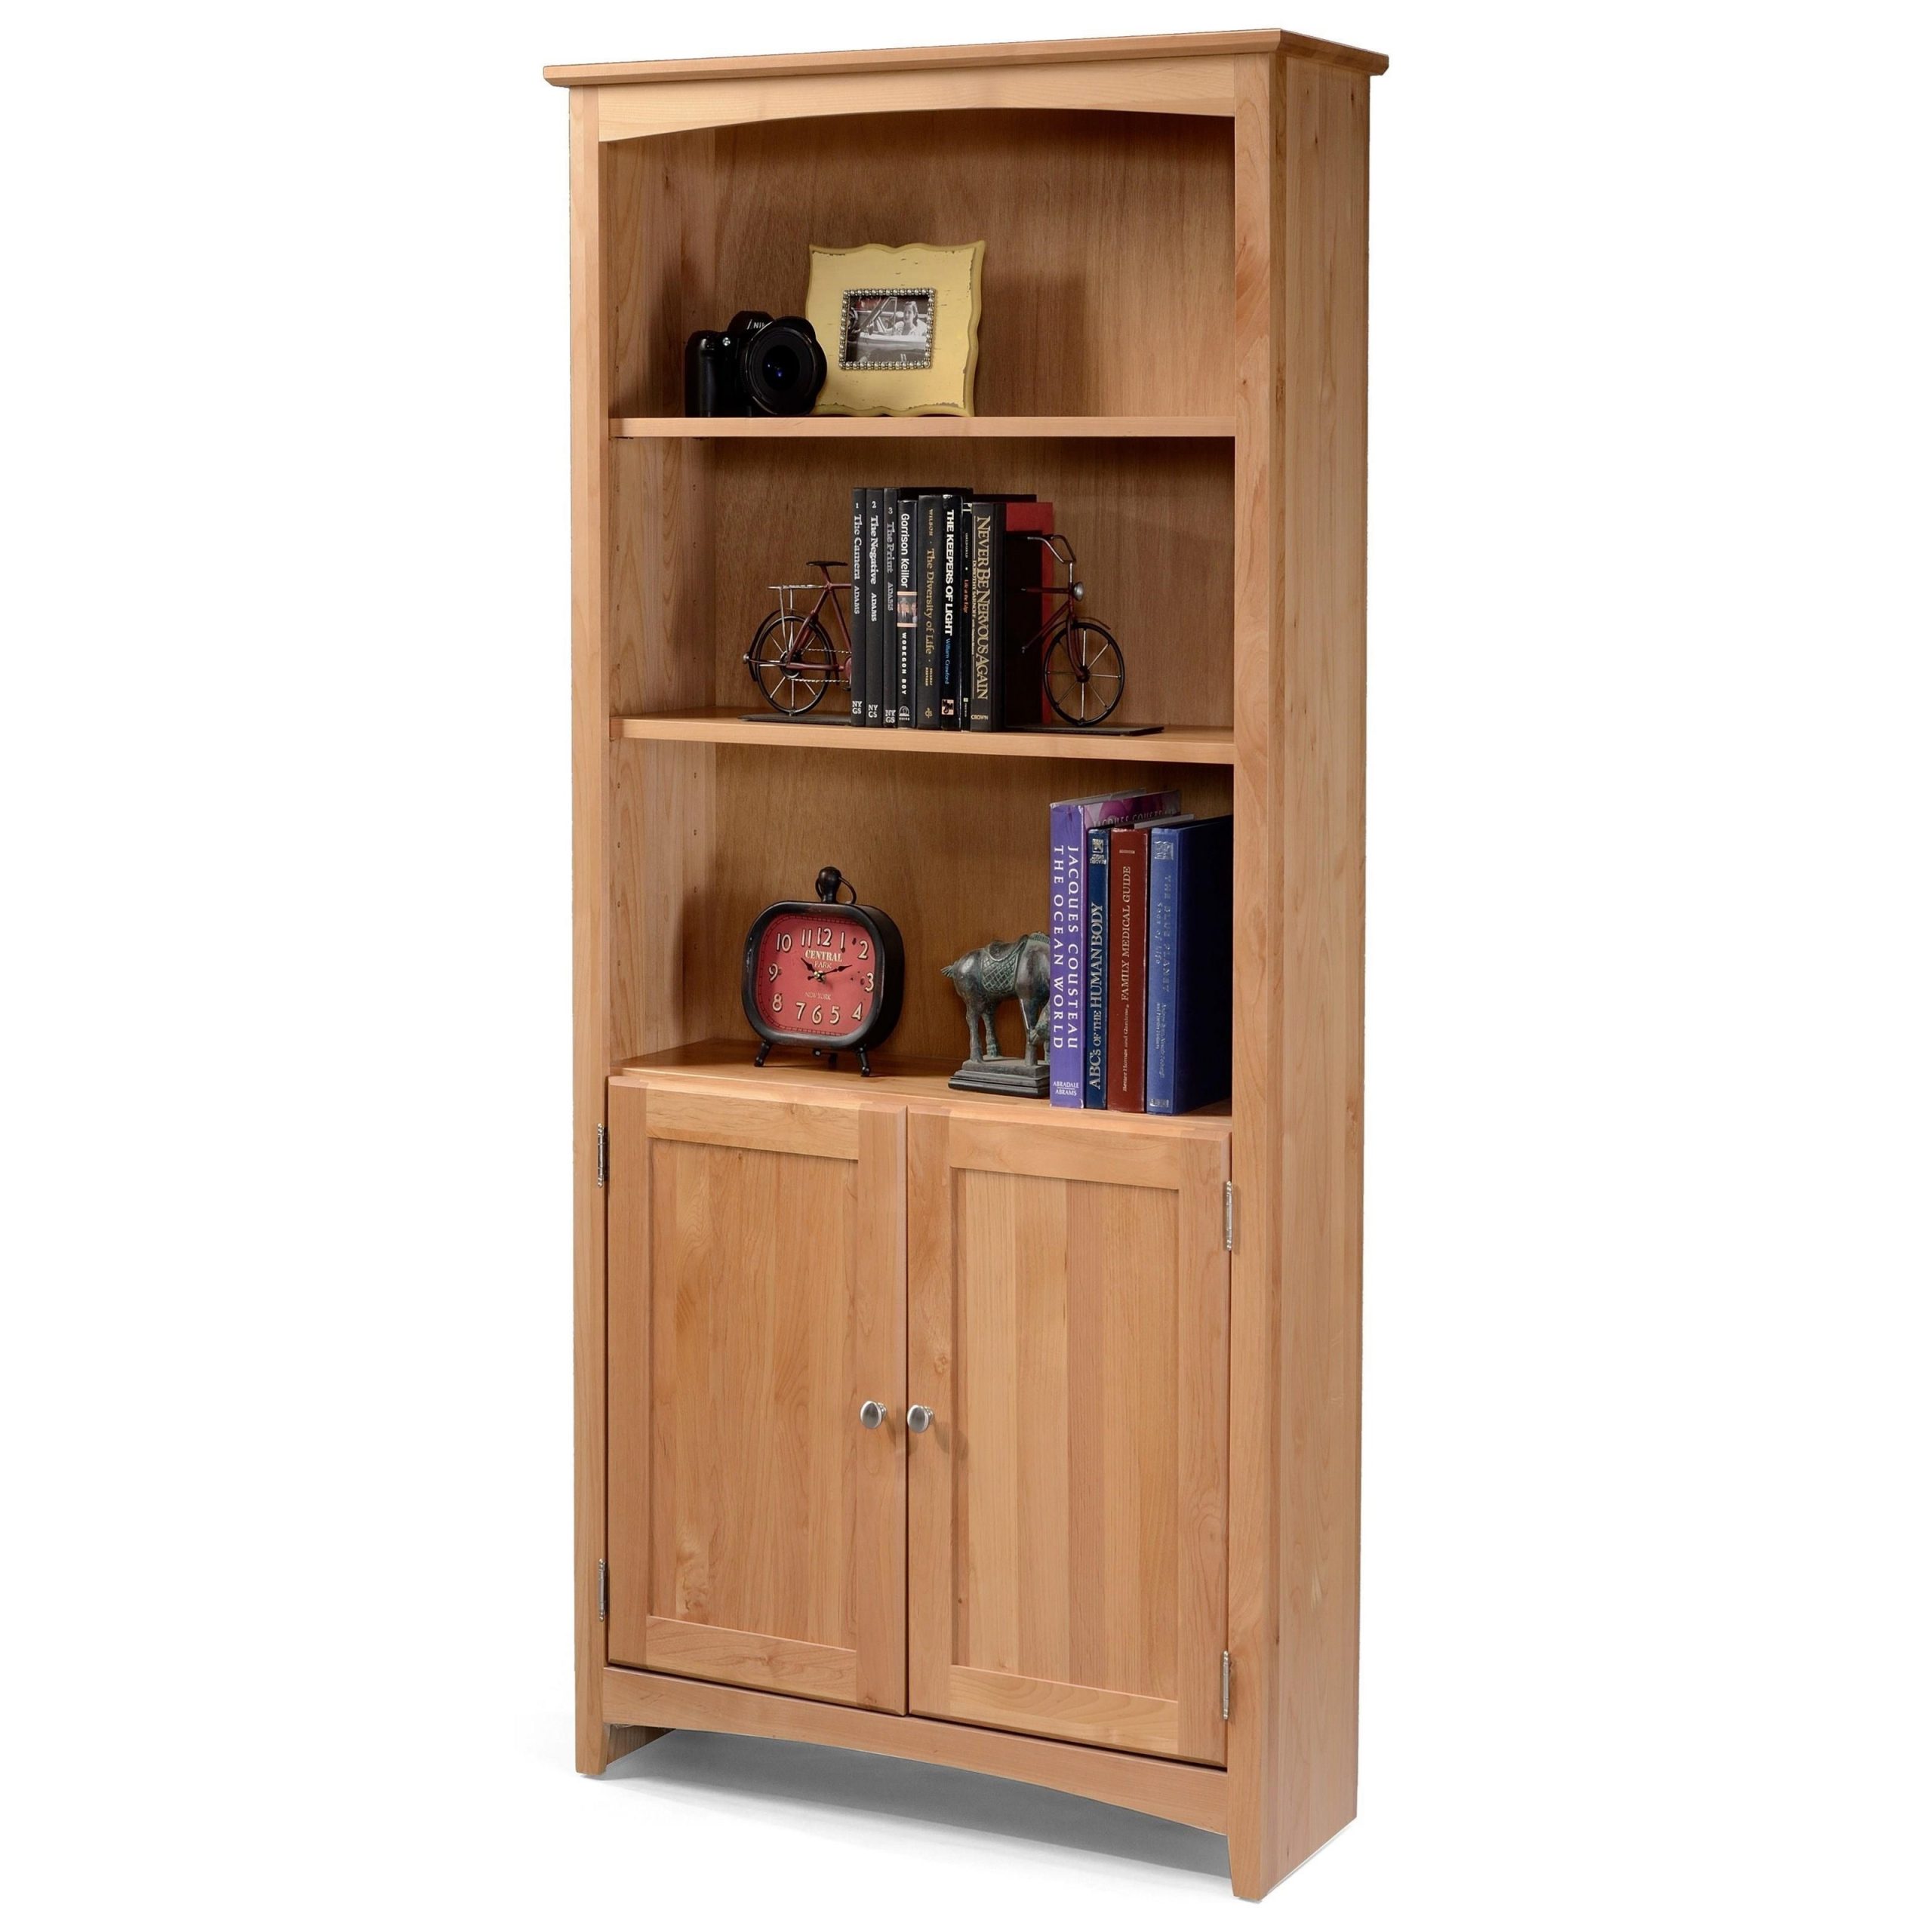 Archbold Furniture Bookcases Solid Wood Alder Bookcase With in sizing 3200 X 3200